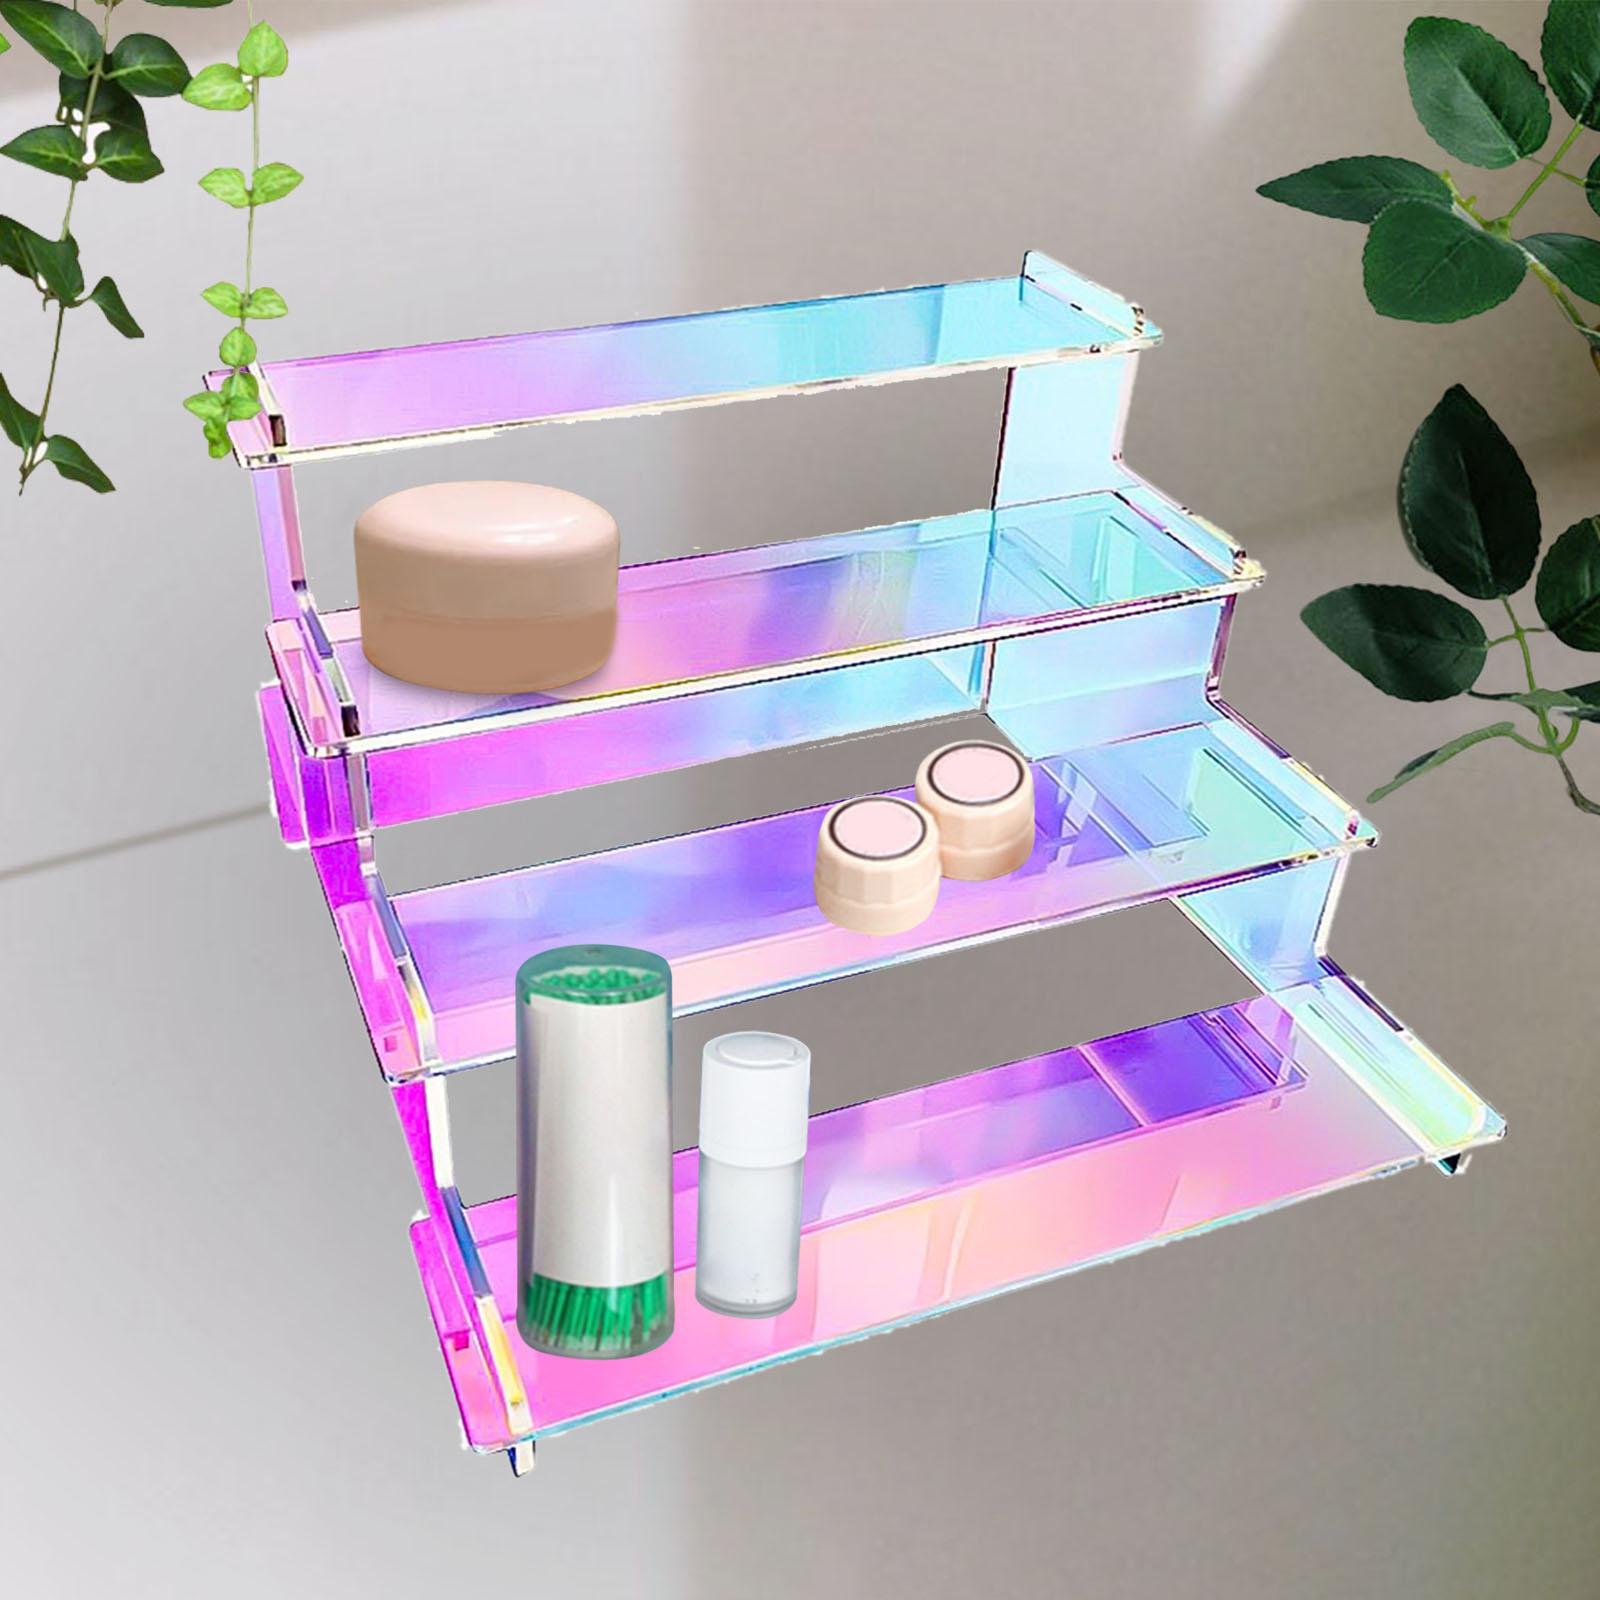 Acrylic Risers for Display Tiered Display Stand for Figurines Spices Glasses